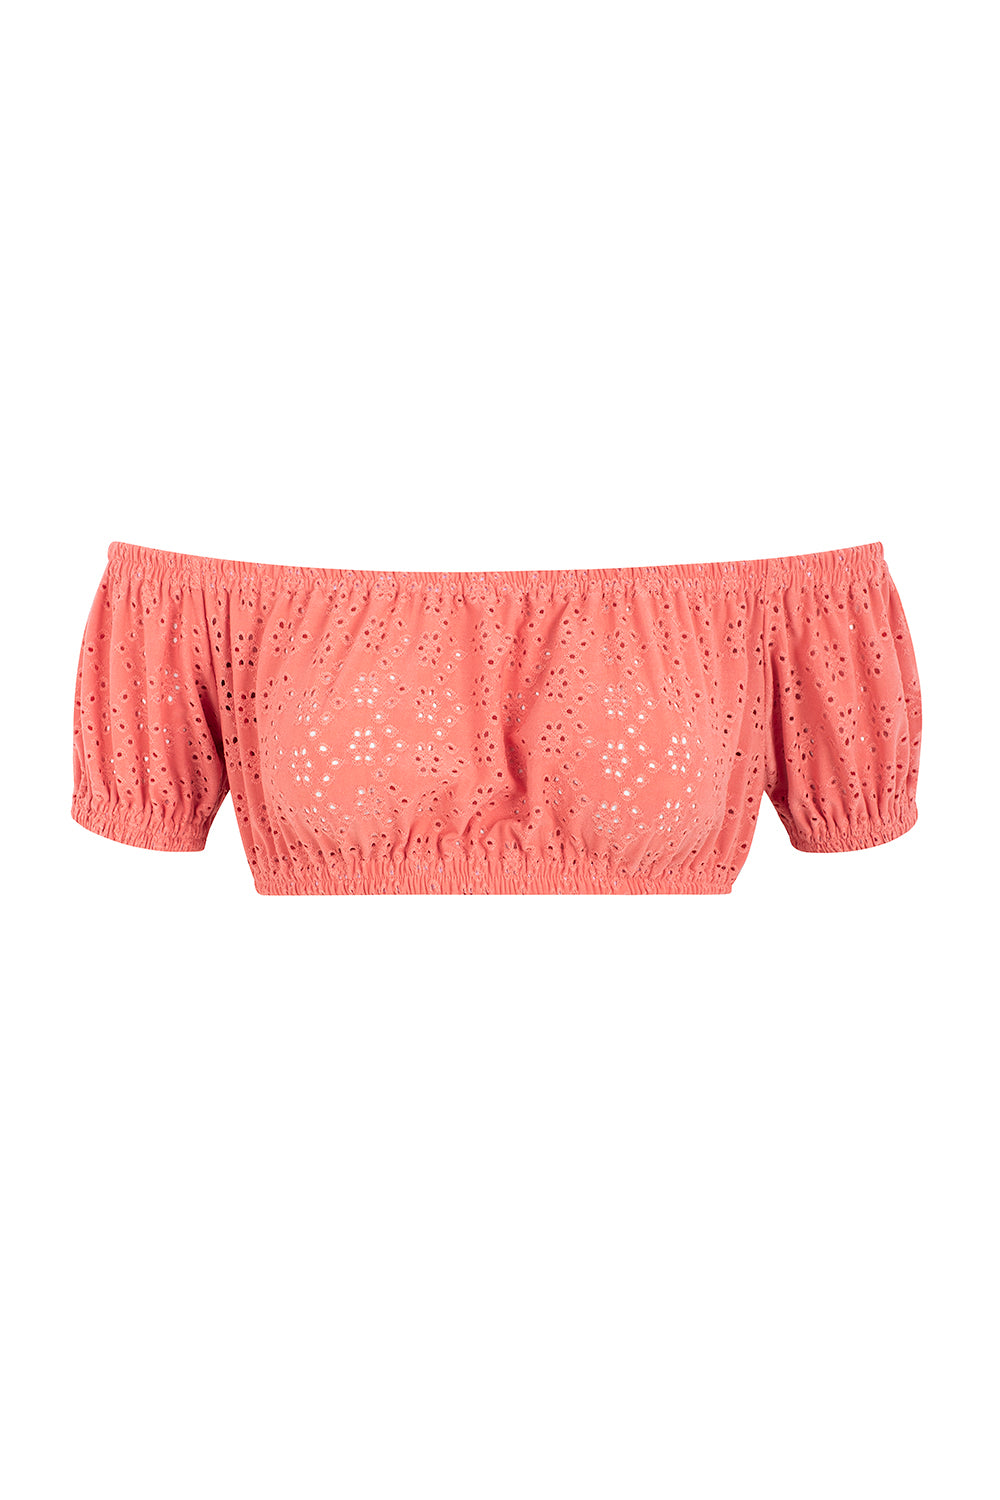 SALMON PUERTO BEACH CROP TOP (OUT OF STOCK)